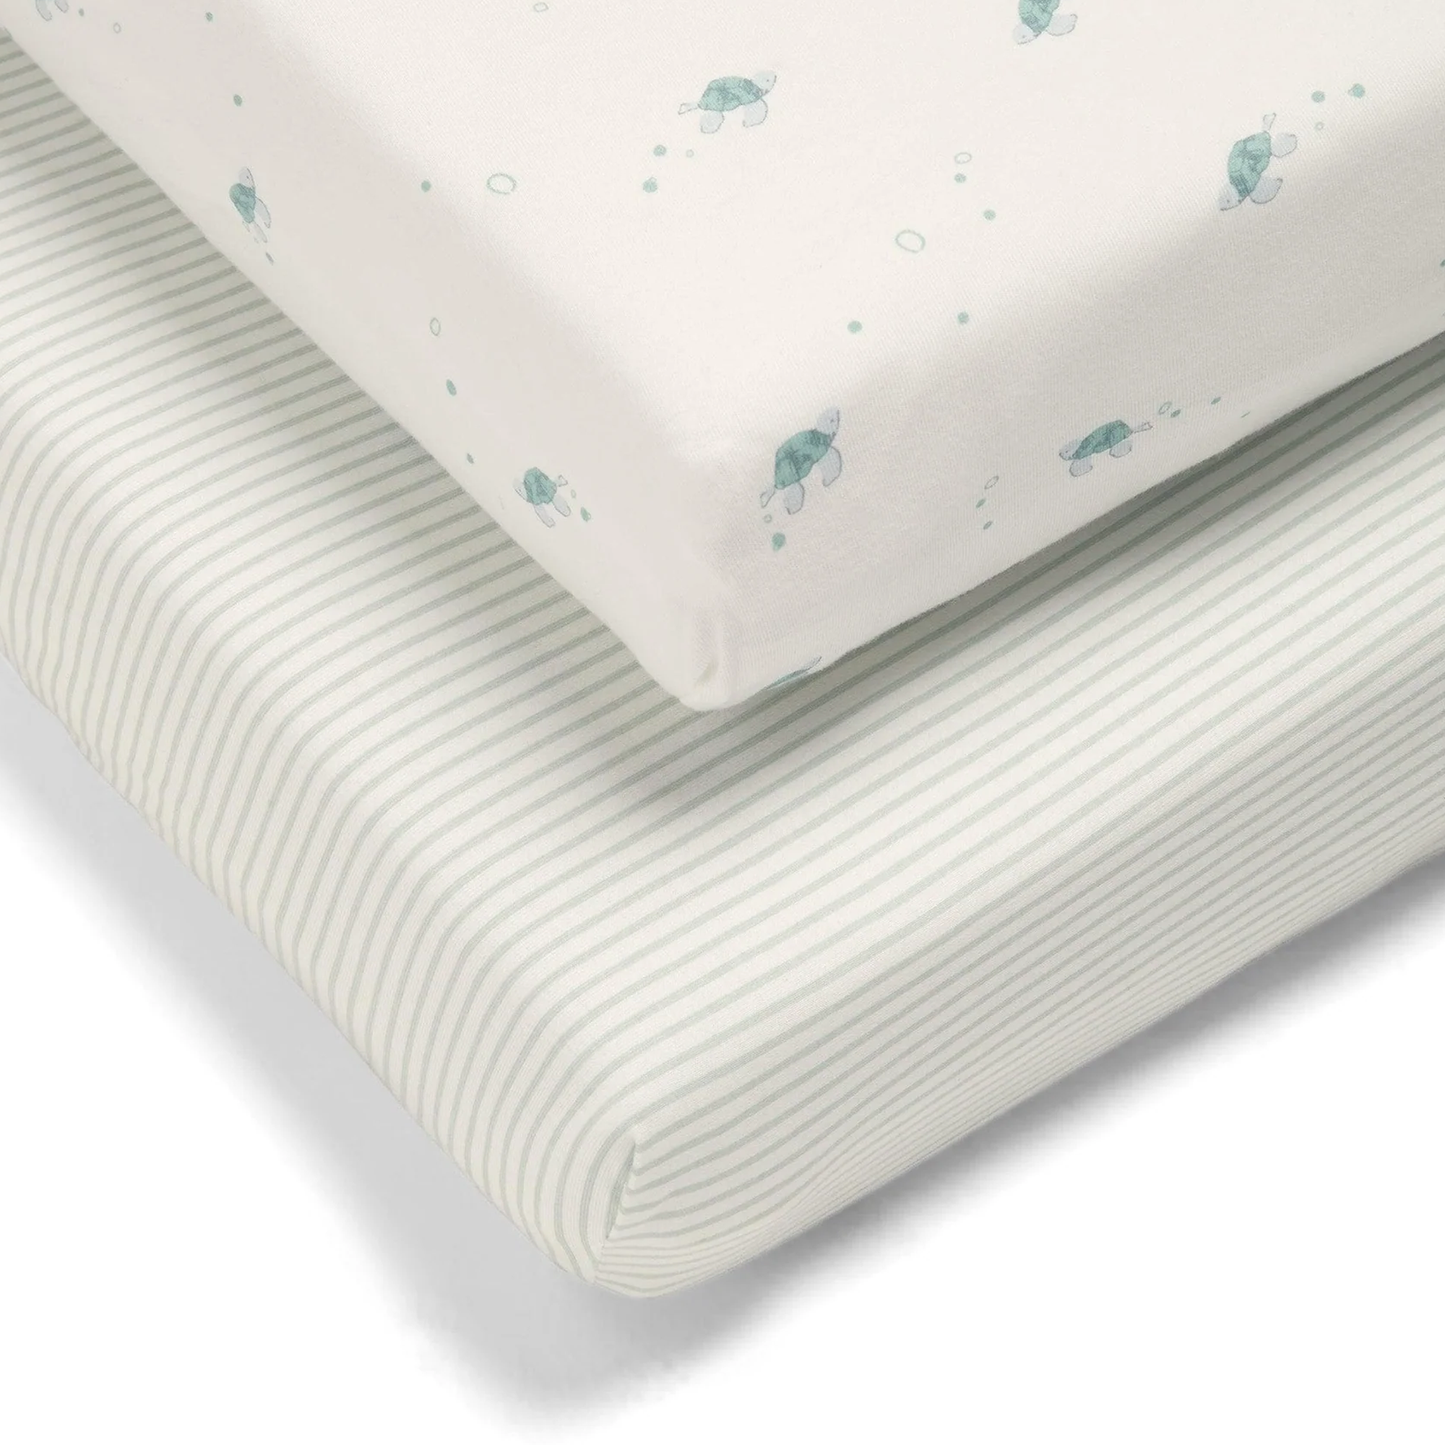 Mamas & Papas Cot/Bed Fitted Sheets - 2 Pack